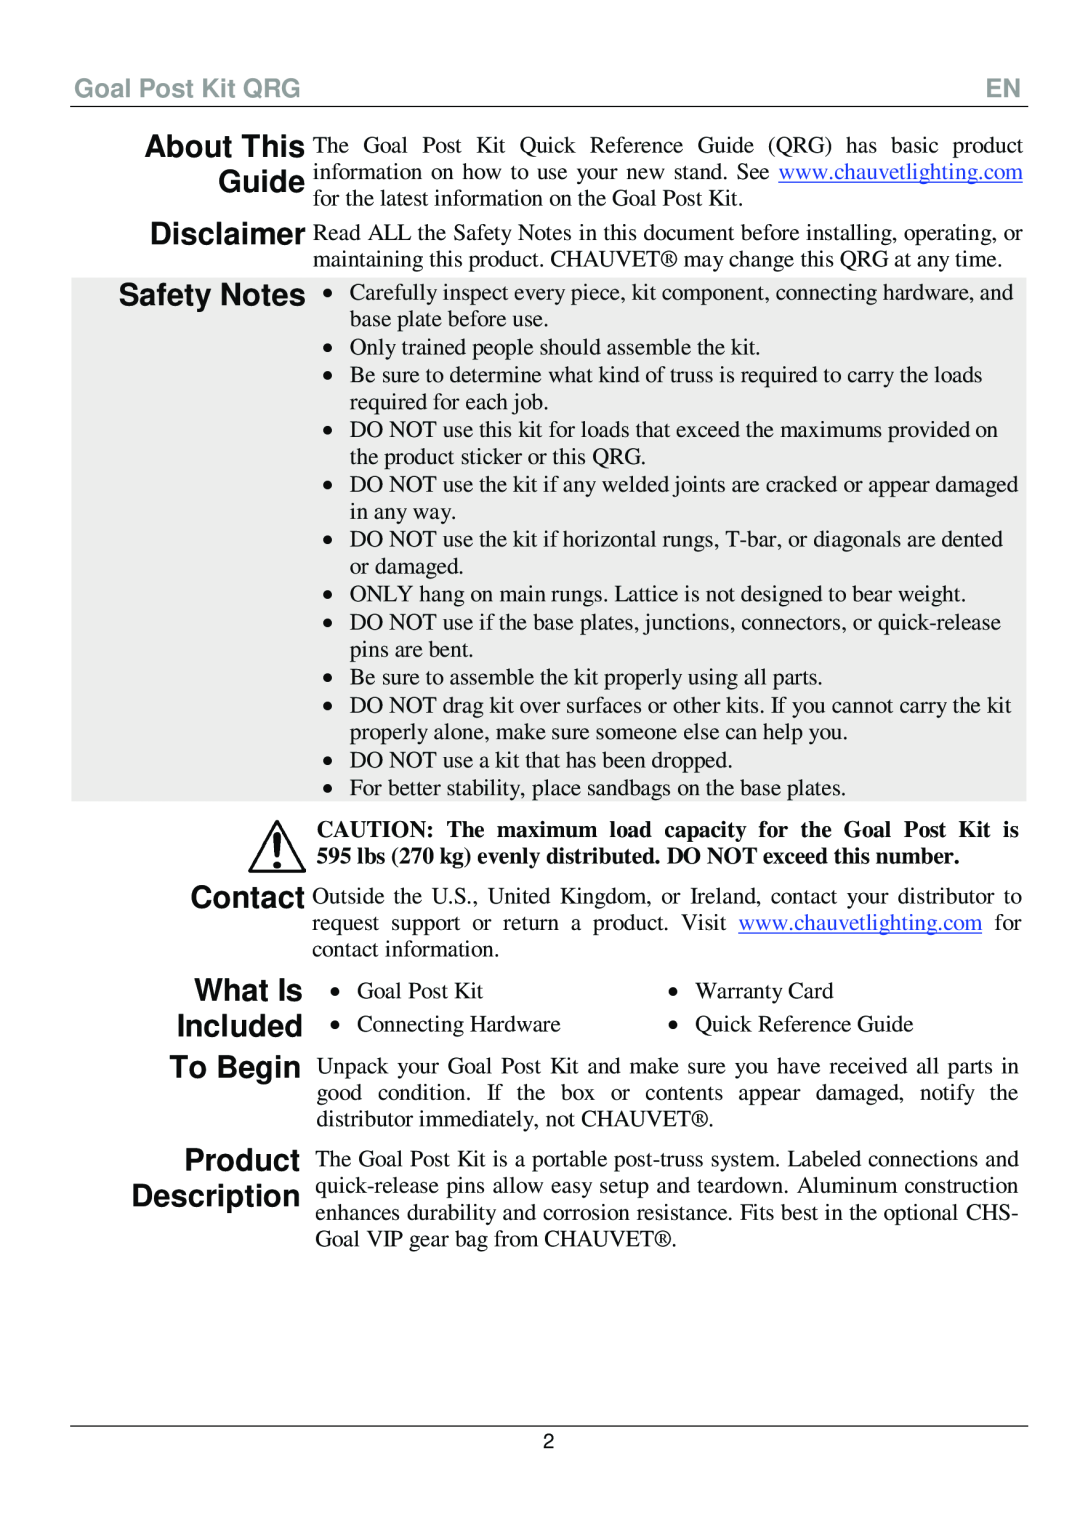 Chauvet 595 manual Safety Notes, What Is Included To Begin Product Description, Goal Post Kit QRG 